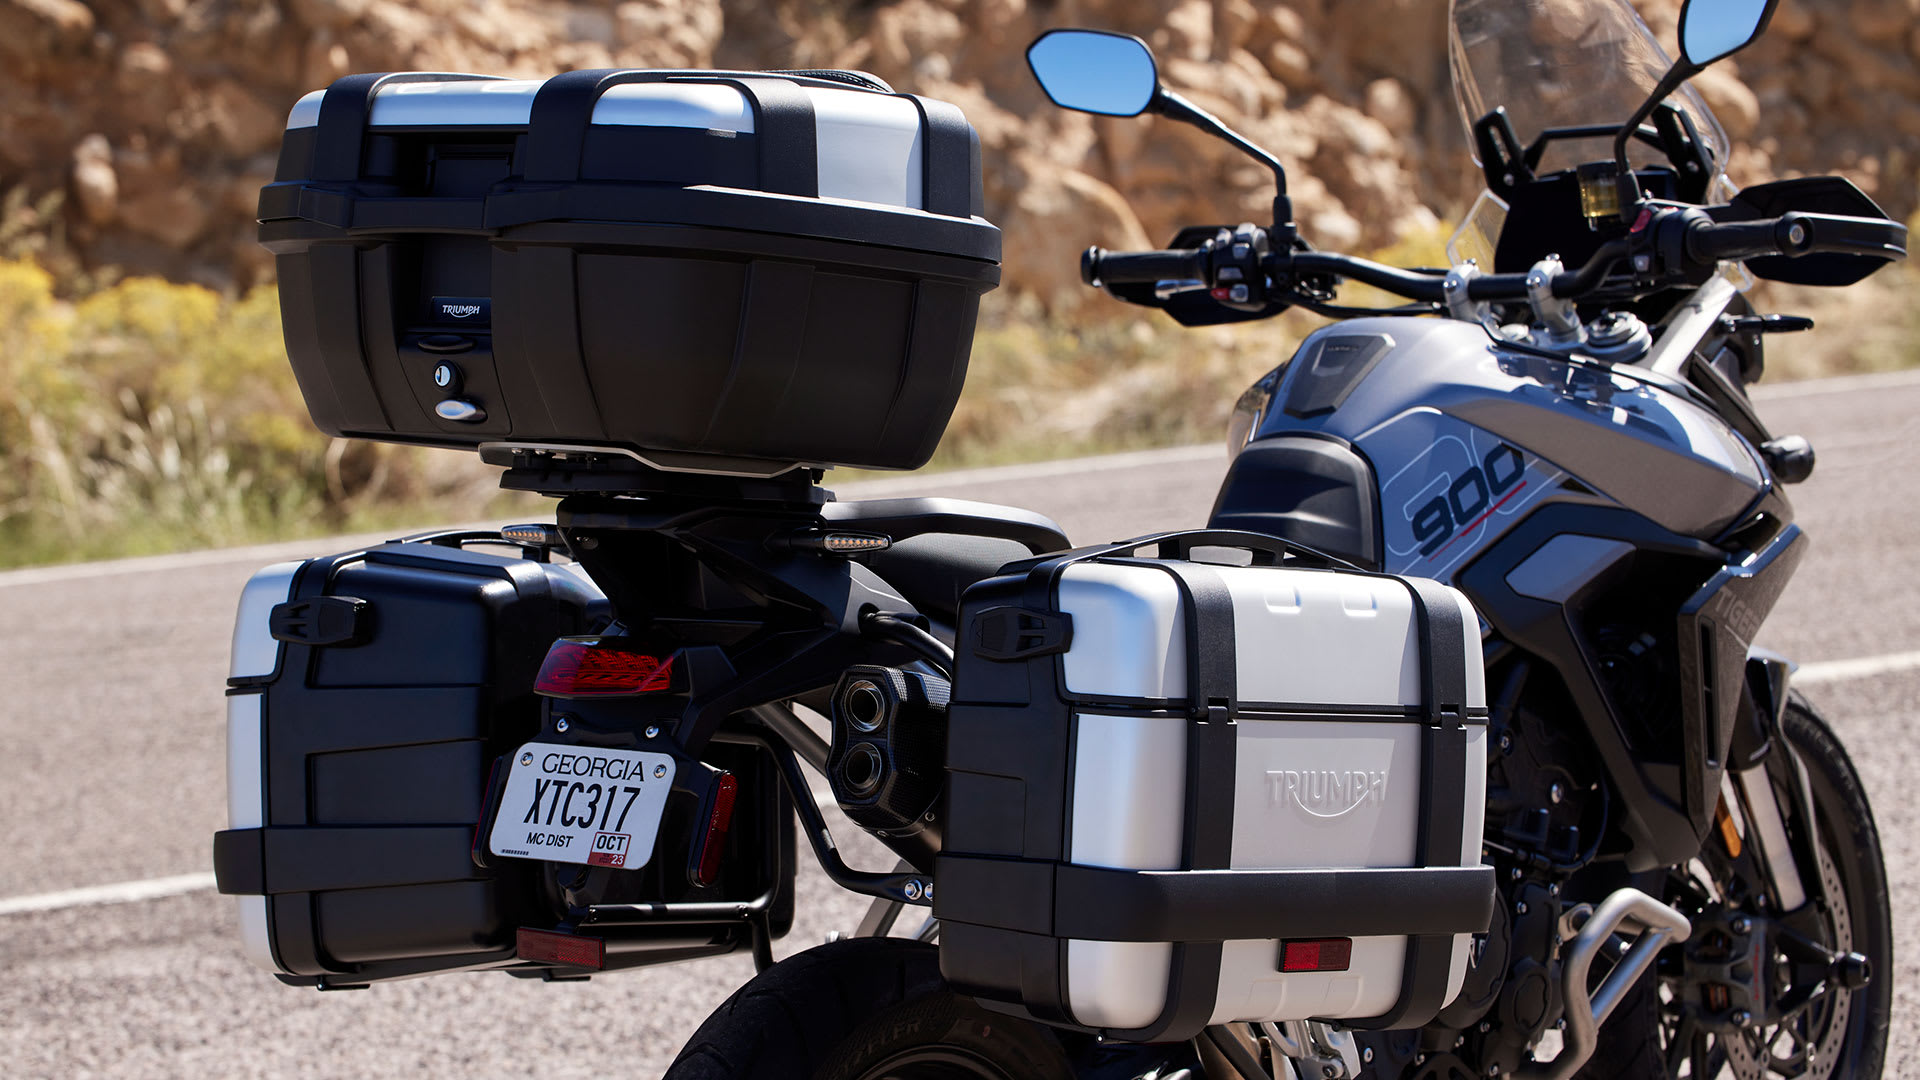 Triumph Tiger 900 luggage collection panniers